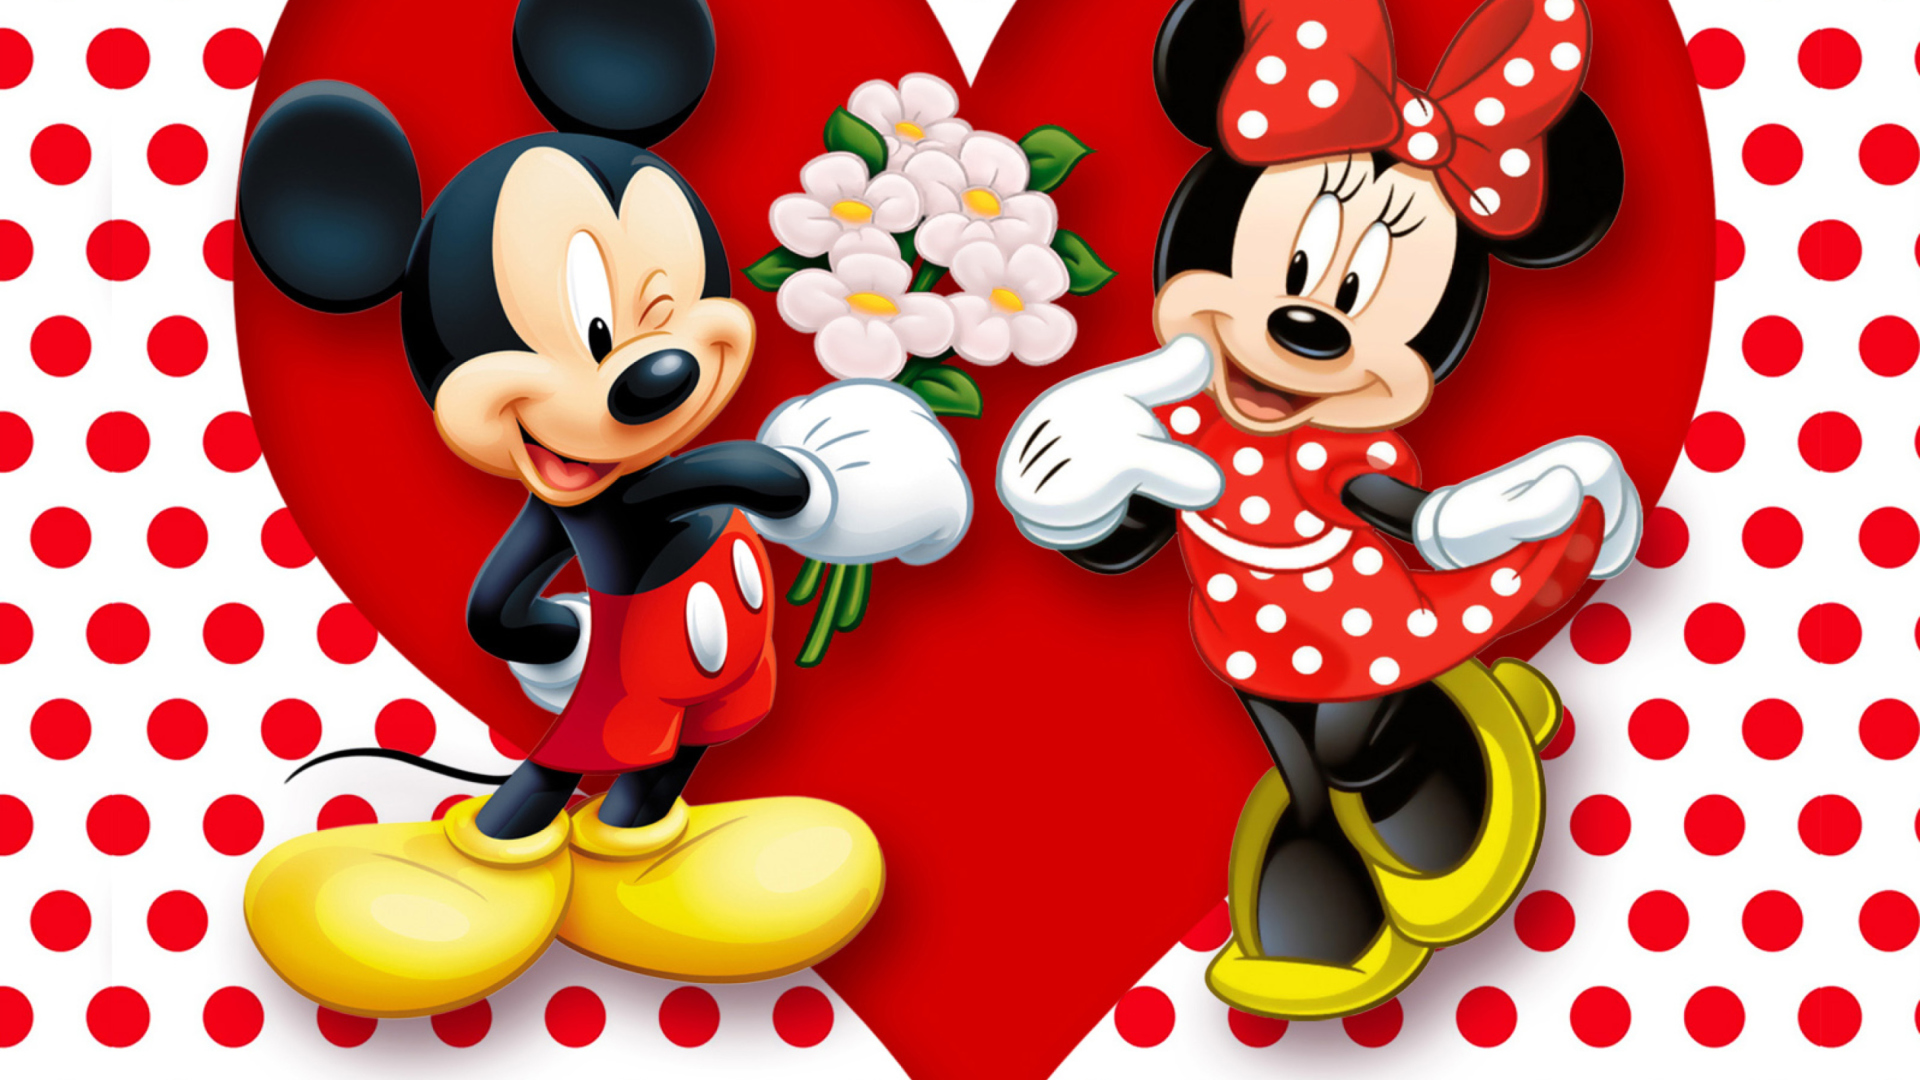 Mickey And Minnie Mouse Wallpaper For Desktop